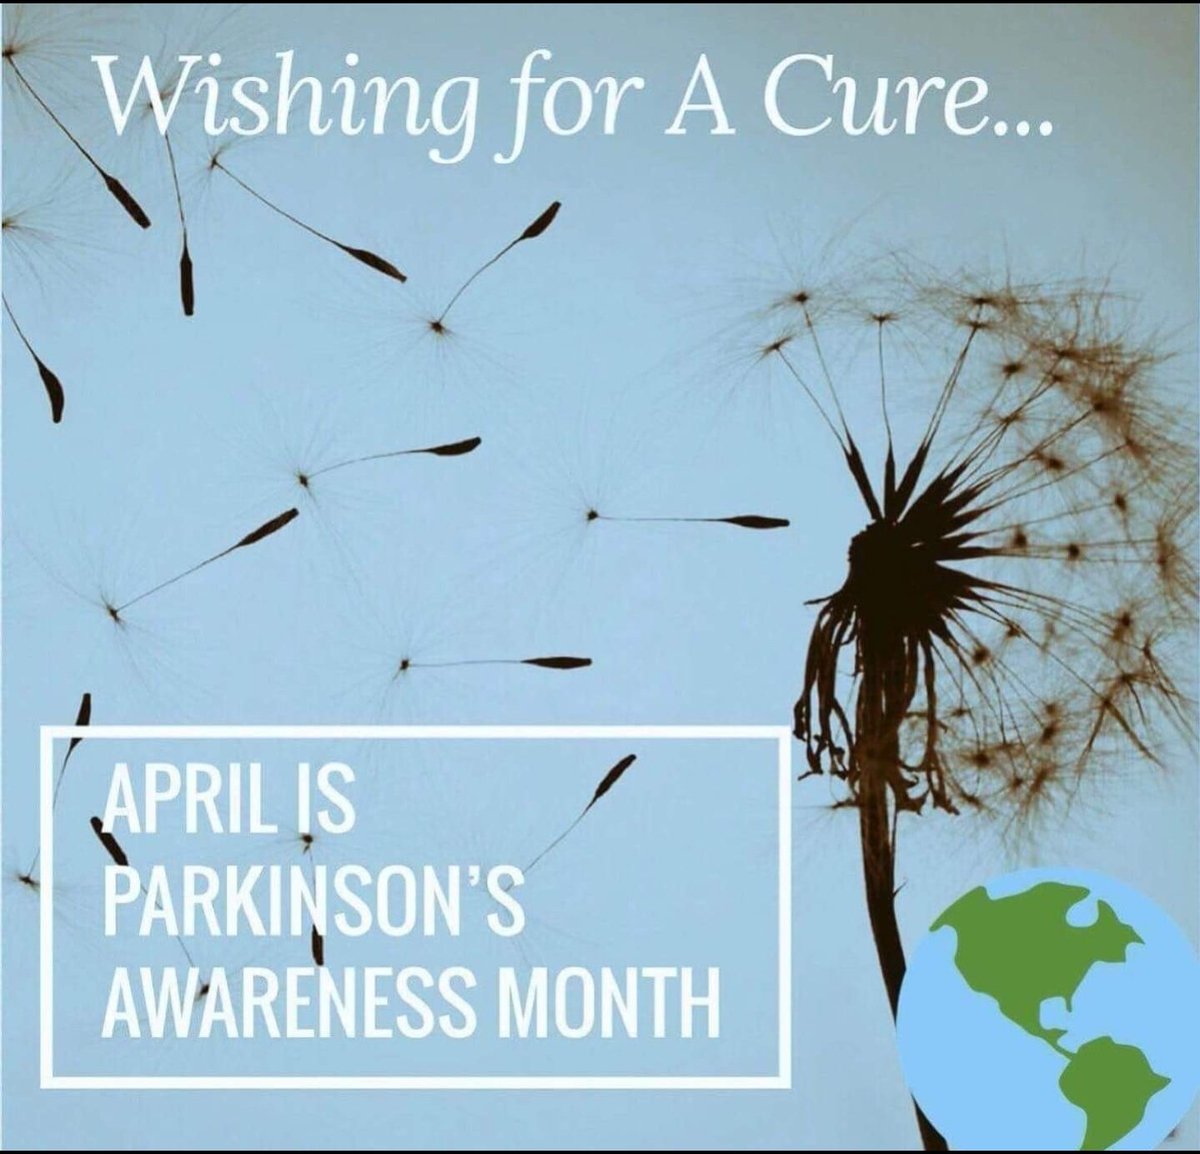 🌷 The month of April is #ParkinsonsAwareness Month.
#Parkinsonsdisease  #TeamUp4ACure #Share